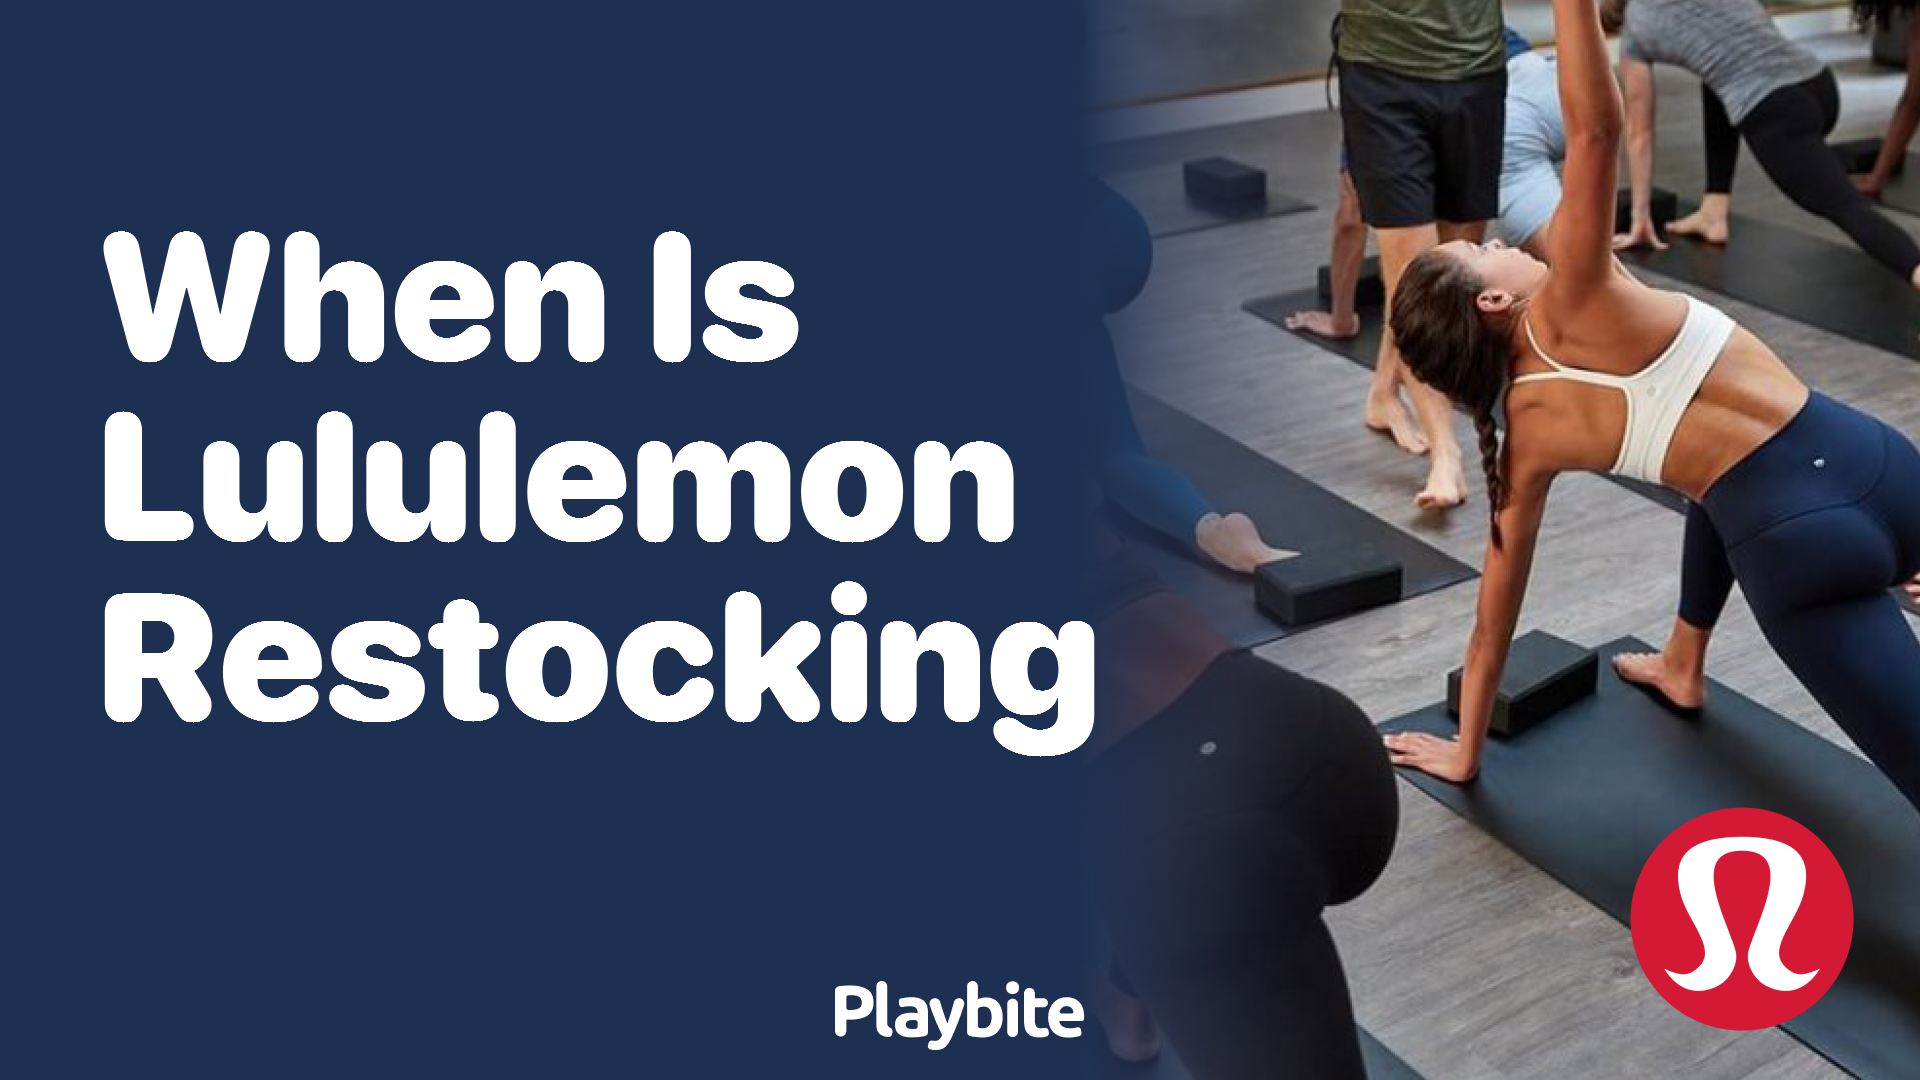 When Does Lululemon Restock? Your Ultimate Guide Is Here